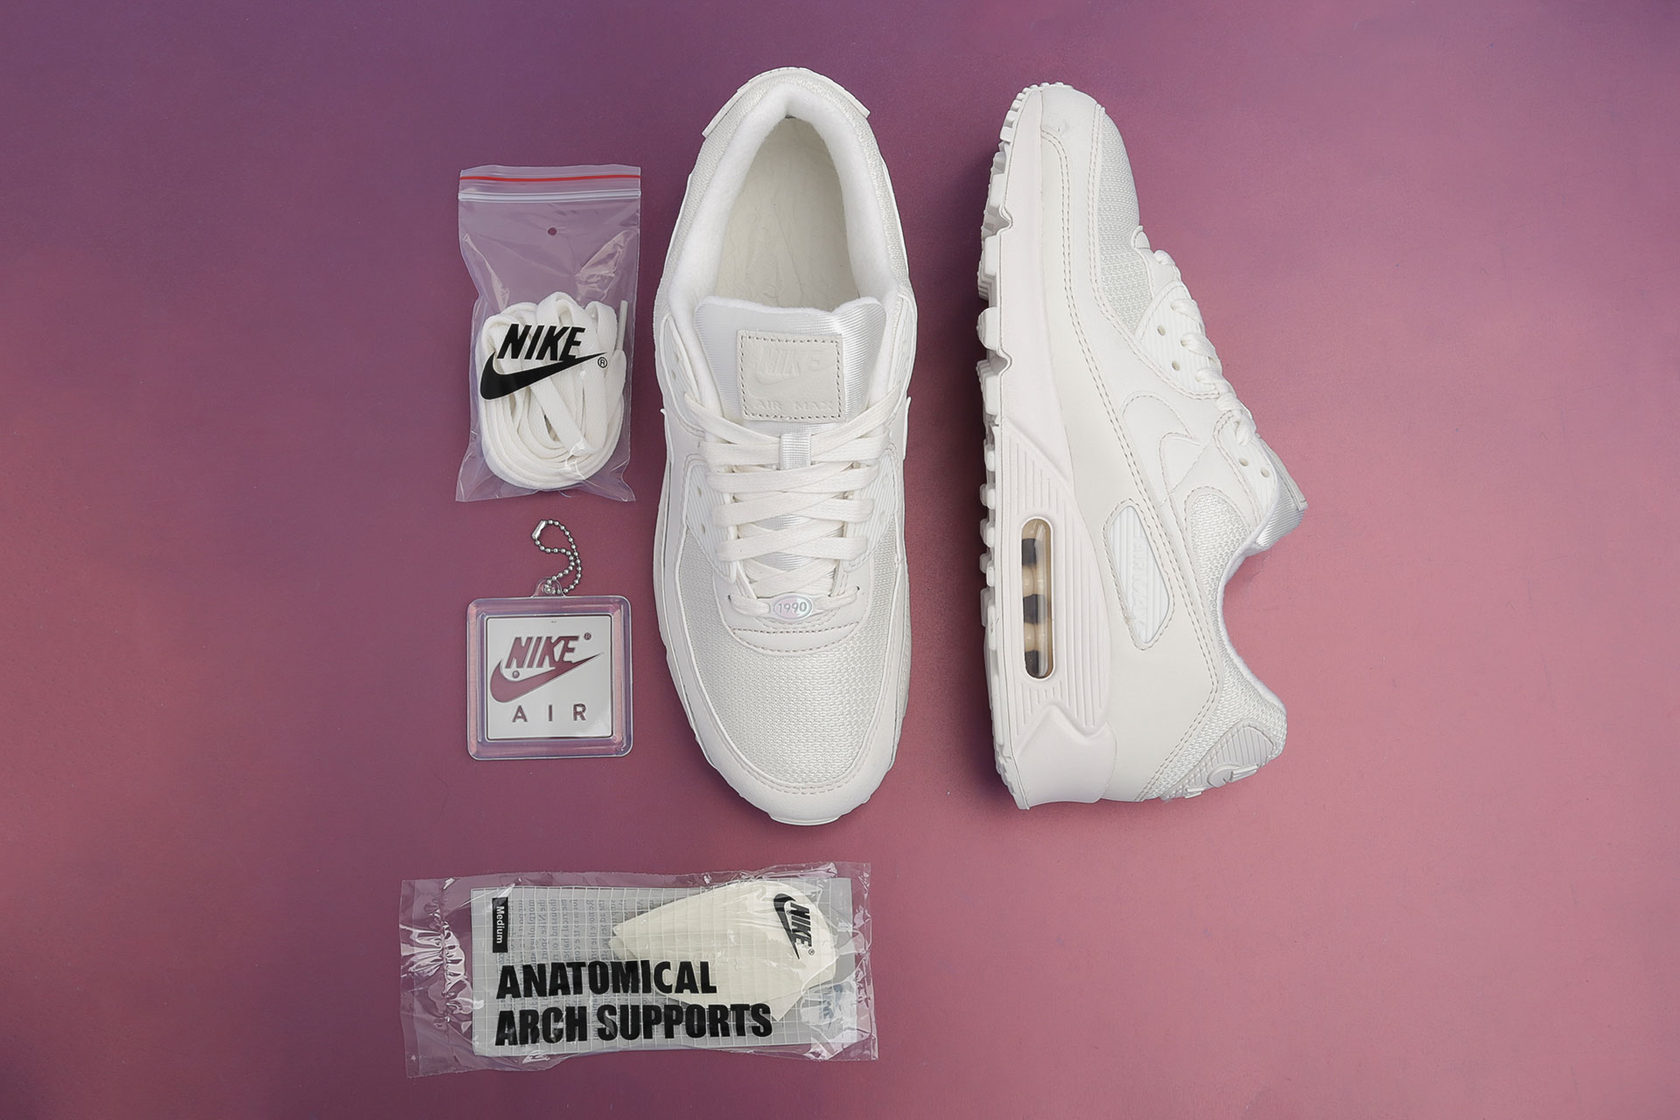 anatomical arch support air max